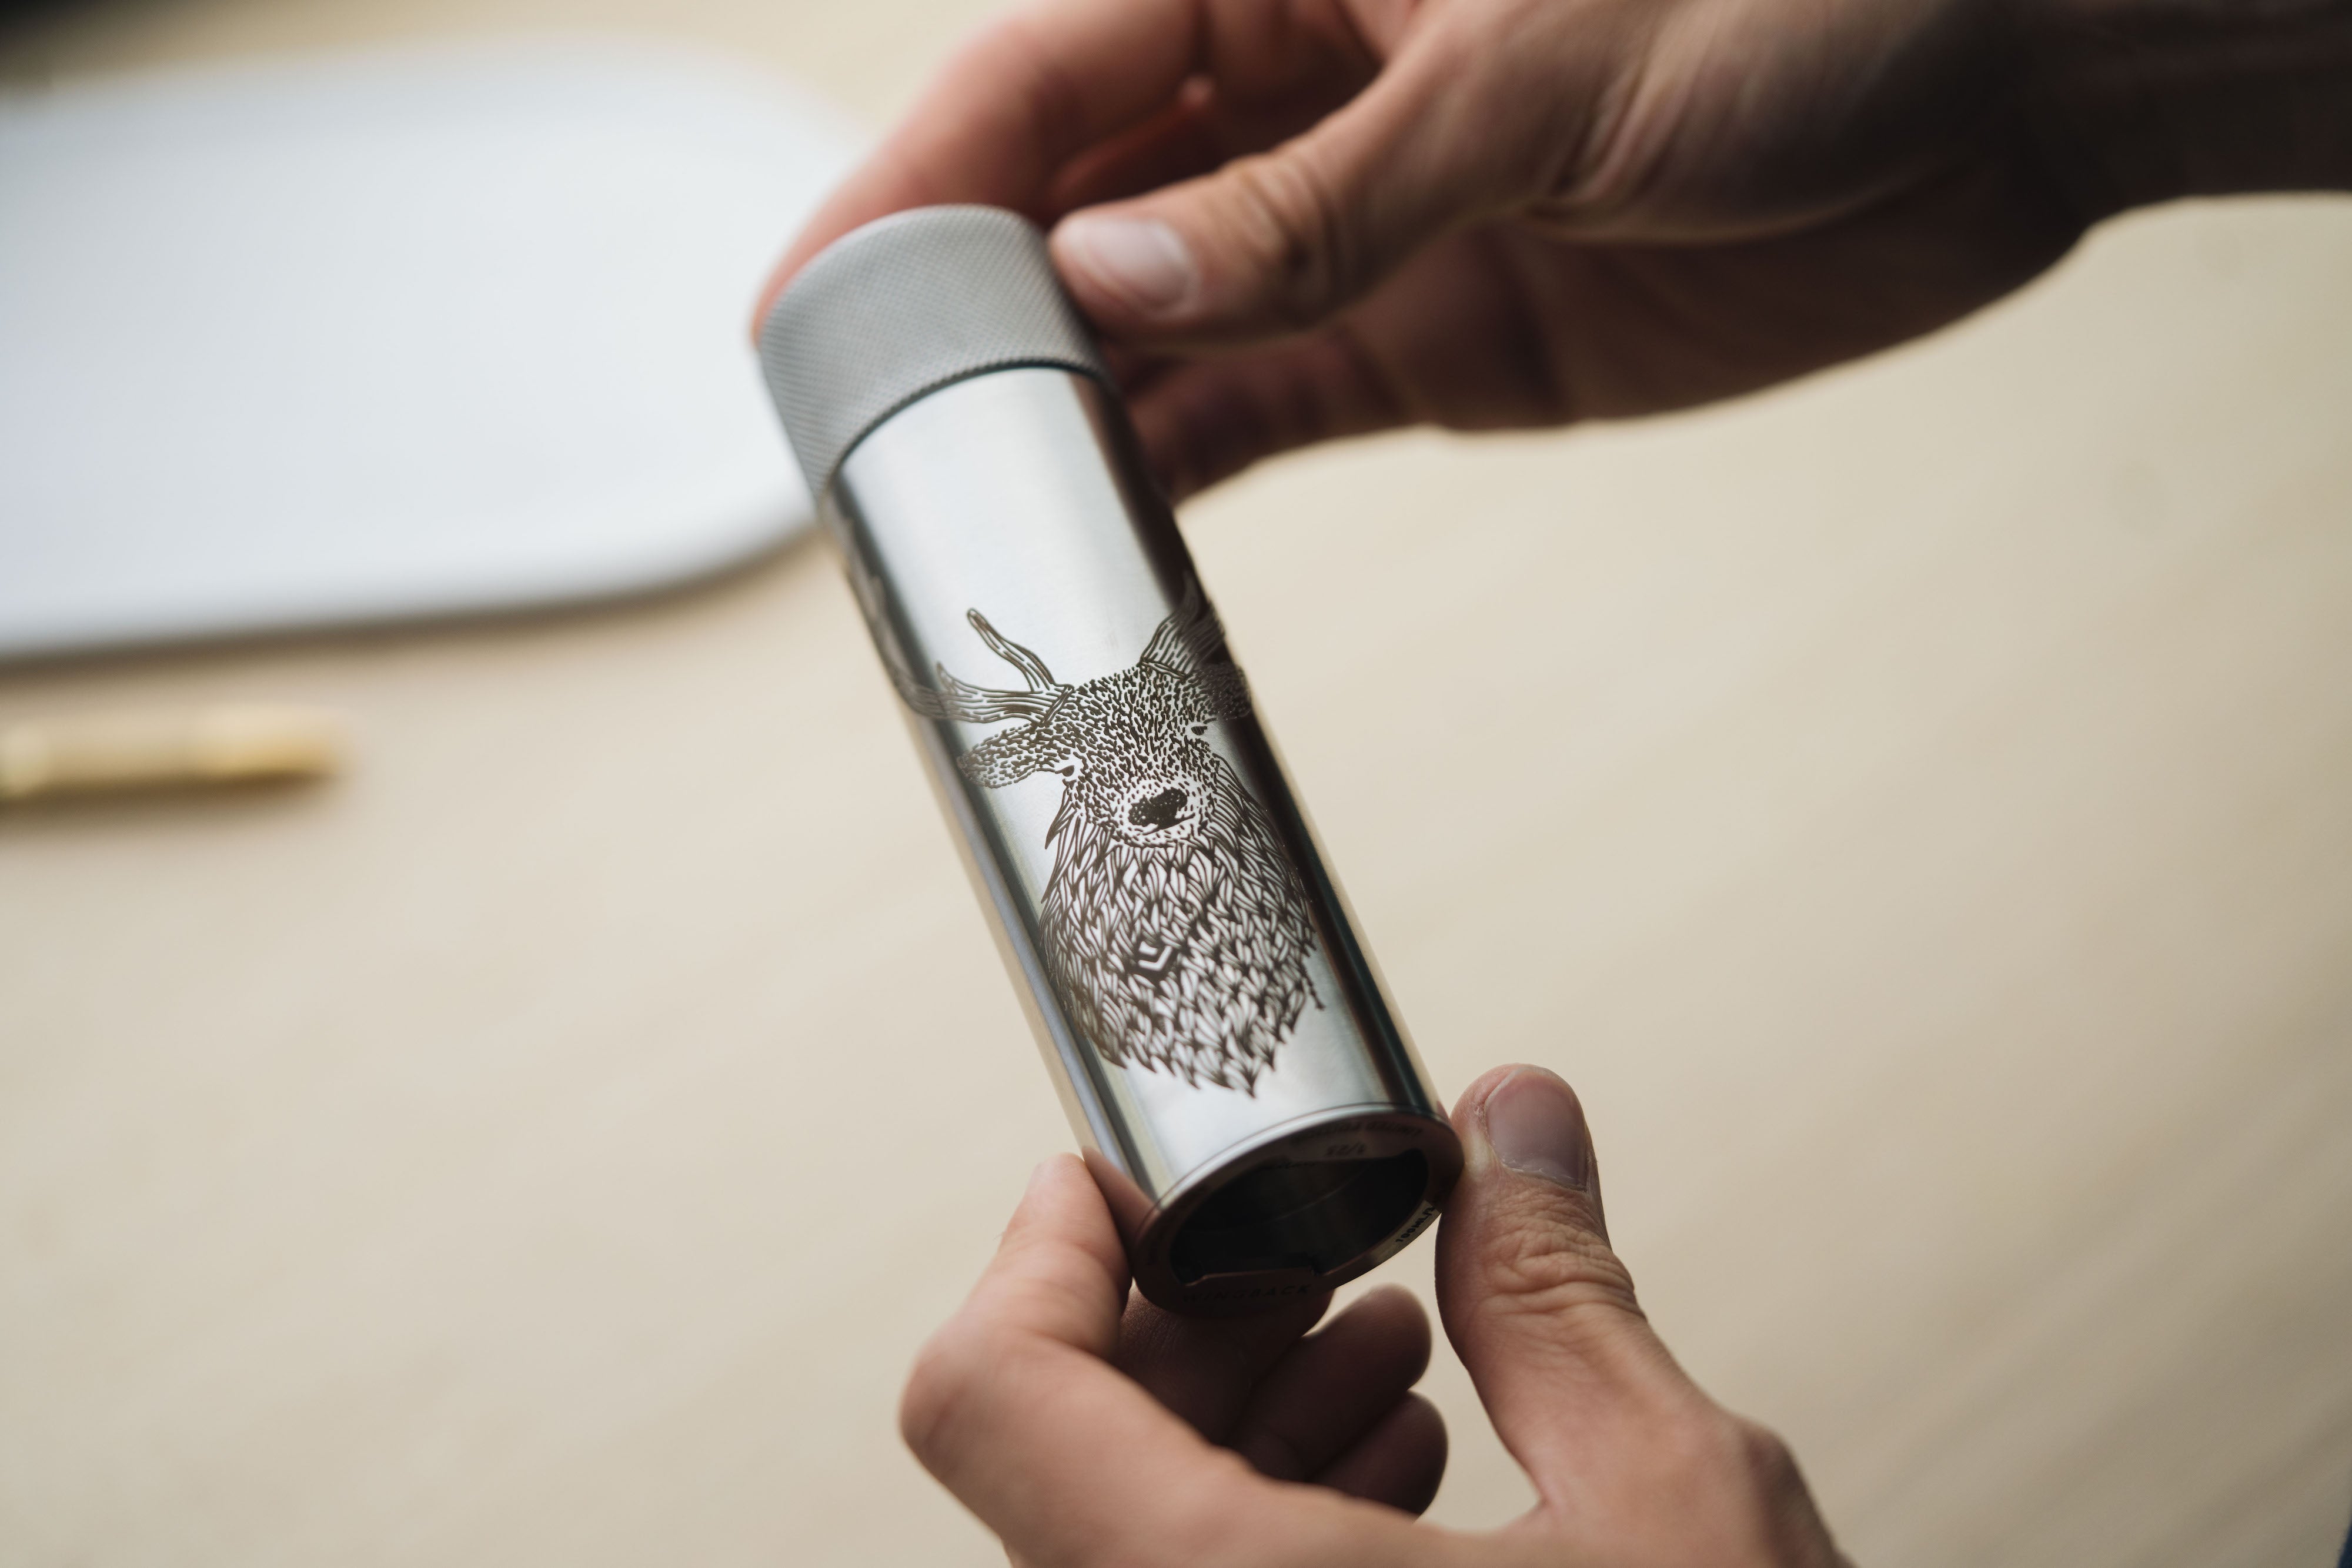 Stainless steel hip flask by Wingback engraved with an illustration of a red stag by artist Os Illustration